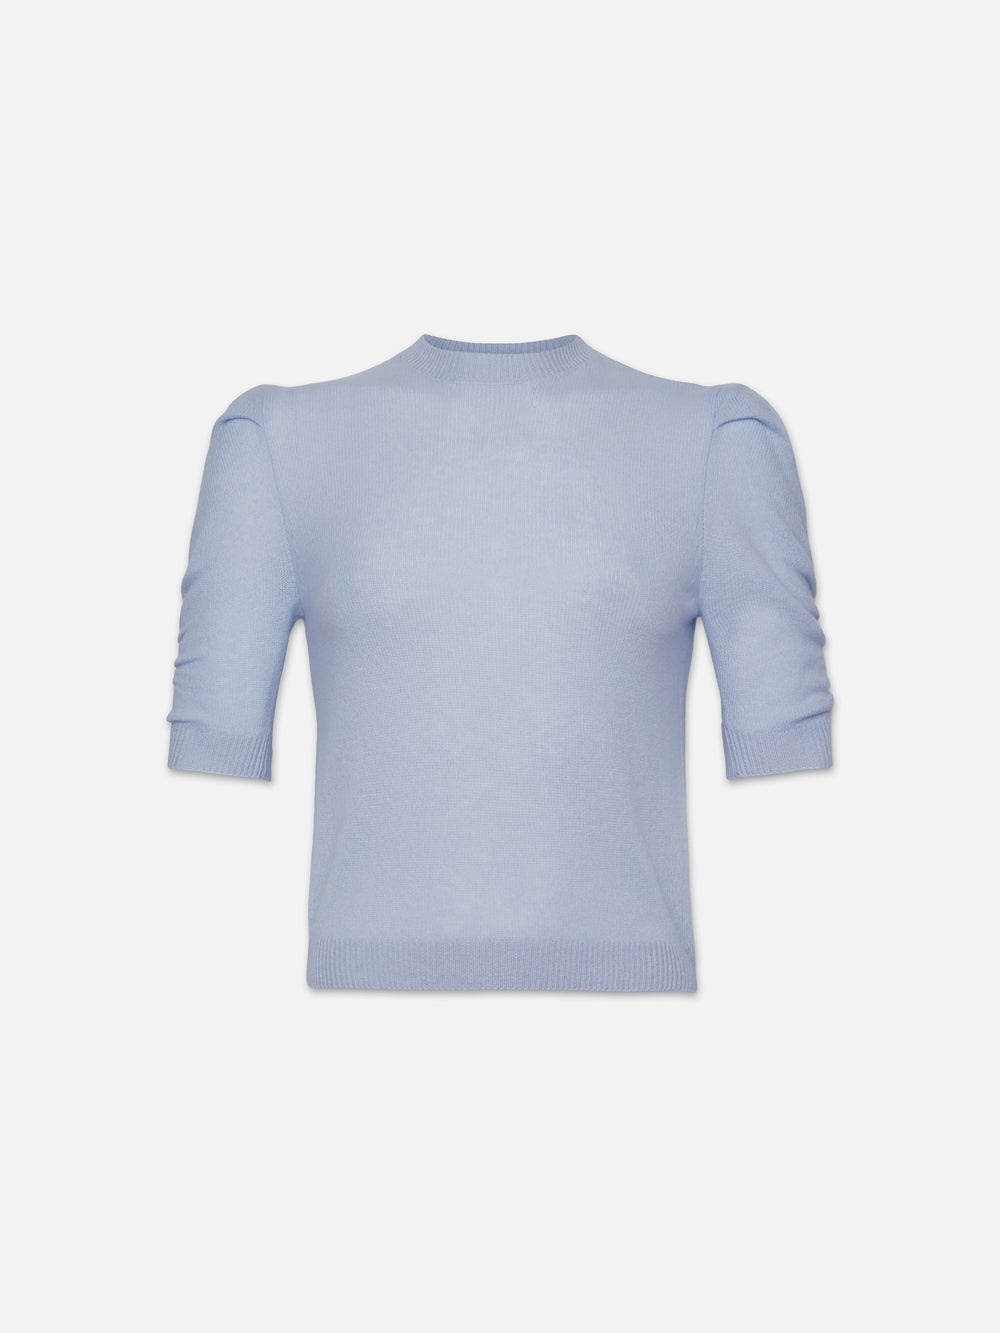 Ruched Sleeve Cashmere Sweater in Light Blue - 1